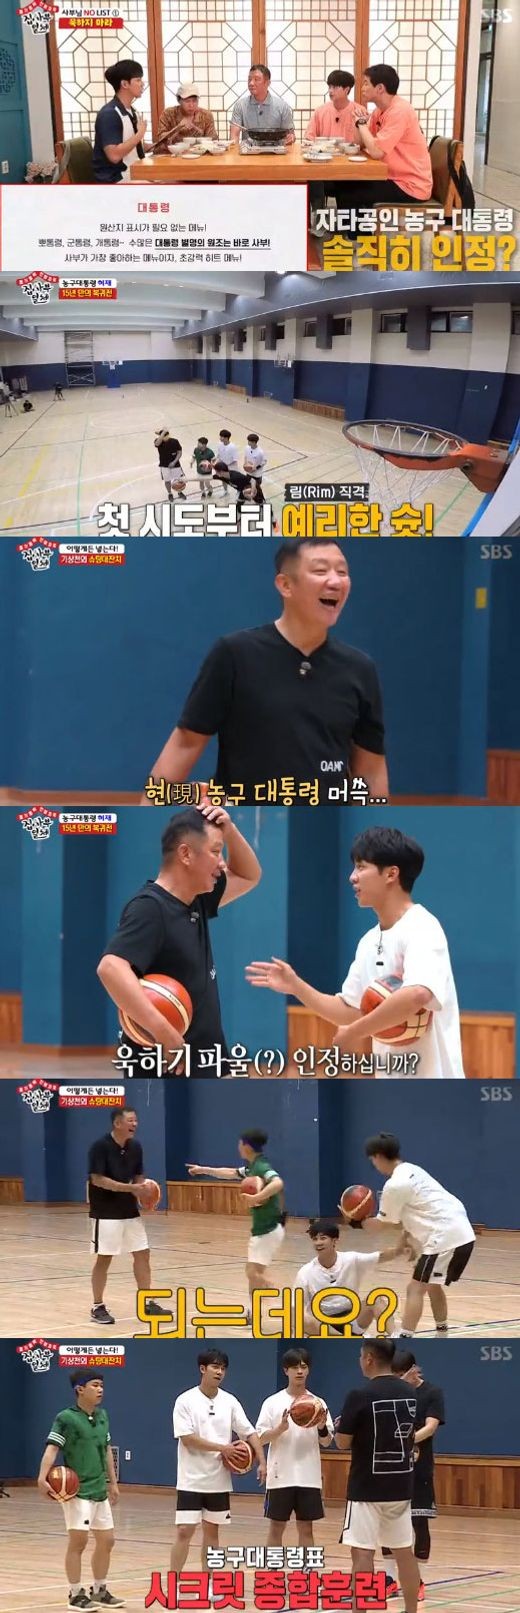 Basketball President Hur Jae showed off his presence with his character and basketball skills in All The Butlers.On the 18th, SBS All The Butlers, Hur Jae appeared as a master and showed members initiating basketball training methods.There is something about life guidelines that we should not do, said Hur Jae, who appeared as master on the day. Two-thirds of our lives are ruined by the storm, so we have suffered a lot of damage.But there are a lot of things that are under control, and there are so many mistakes that I made in the past, Lee Seung-gi said.If you are going to get a penalty, lets set a rule for the night, Hur Jae accepted it.However, Hur Jaes character continued during the conversation and the Basketball drills real fantasy, and Lee Seung-gi laughed at the time of hitting the night.Hur Jae also expressed his pride in the nickname of basketball president, saying, At that time, the president of basketball was right.But the president cant win, he said.Hur Jae also had time to initiate the Basketball drills real fantasy law to members.Hur Jae accepted the offer to the basketball legend to cover his eyes and make a shot; however, the ball bounced off the goalpost.Lee Seung-gi then hit the top Model, which blindfolded and shot so easily.This time he did the Top Model, turning back and throwing shots; unfortunately Hur Jae failed.But this time Yang Se-hyeong turned back and shot to throw, making Hur Jae shrug.Lee Seung-gi was once again successful in the next lie and shot, and Hur Jae had to face a situation again.Hur Jae and the members of the basketball martial arts festival gathered their eyes with a smile that overturned expectations.On the same day, Hur Jae initiated basketball technology and advised that the source of his confidence was endless practice, saying, I tried not to lose, so I got the name of the current basketball president.On this day, Hur Jae and the members came to the Top Model to revive basketball.Hur Jaes alma mater basketball team players, together with the citizens, Hur Jae did an amazing Top Model with the members.If he shot at the halfline and succeeded, he could give a hundred basketballs to the citizens. Eventually, Hur Jae proved the basketball presidents strength by making a picturesque shot at the halfline.